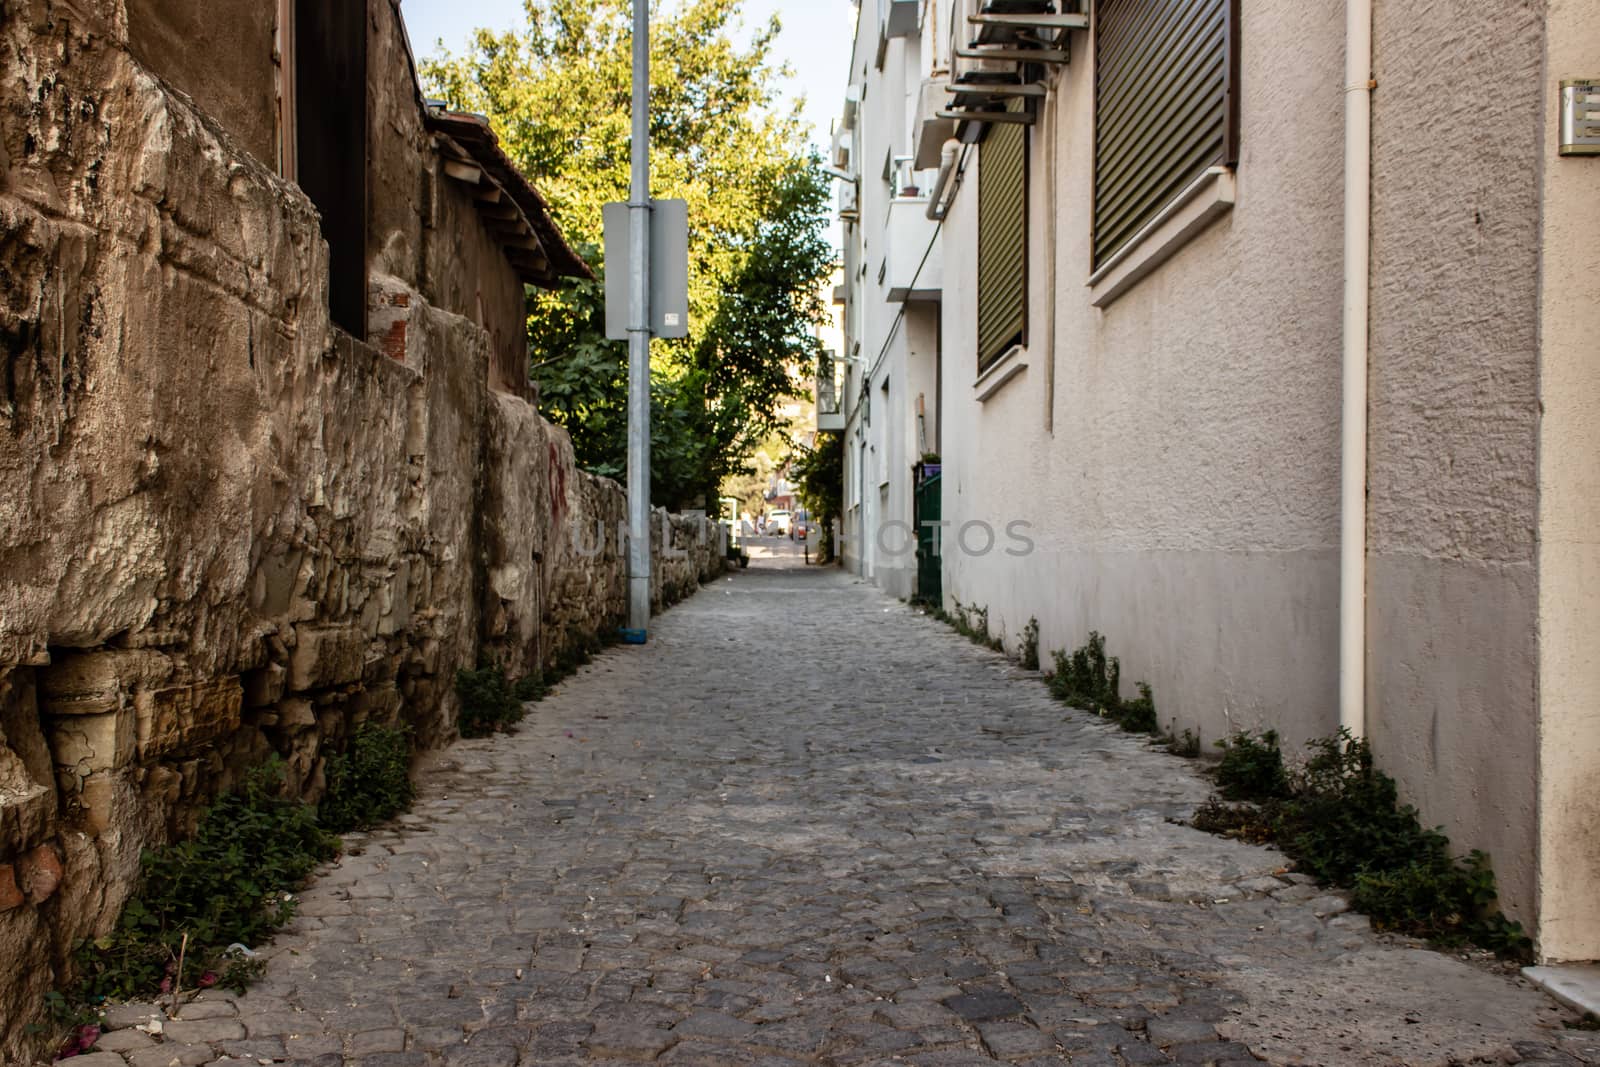 a wide shoot of urban street with stone floors and old vintage buildings. photo has taken from foca/izmir.